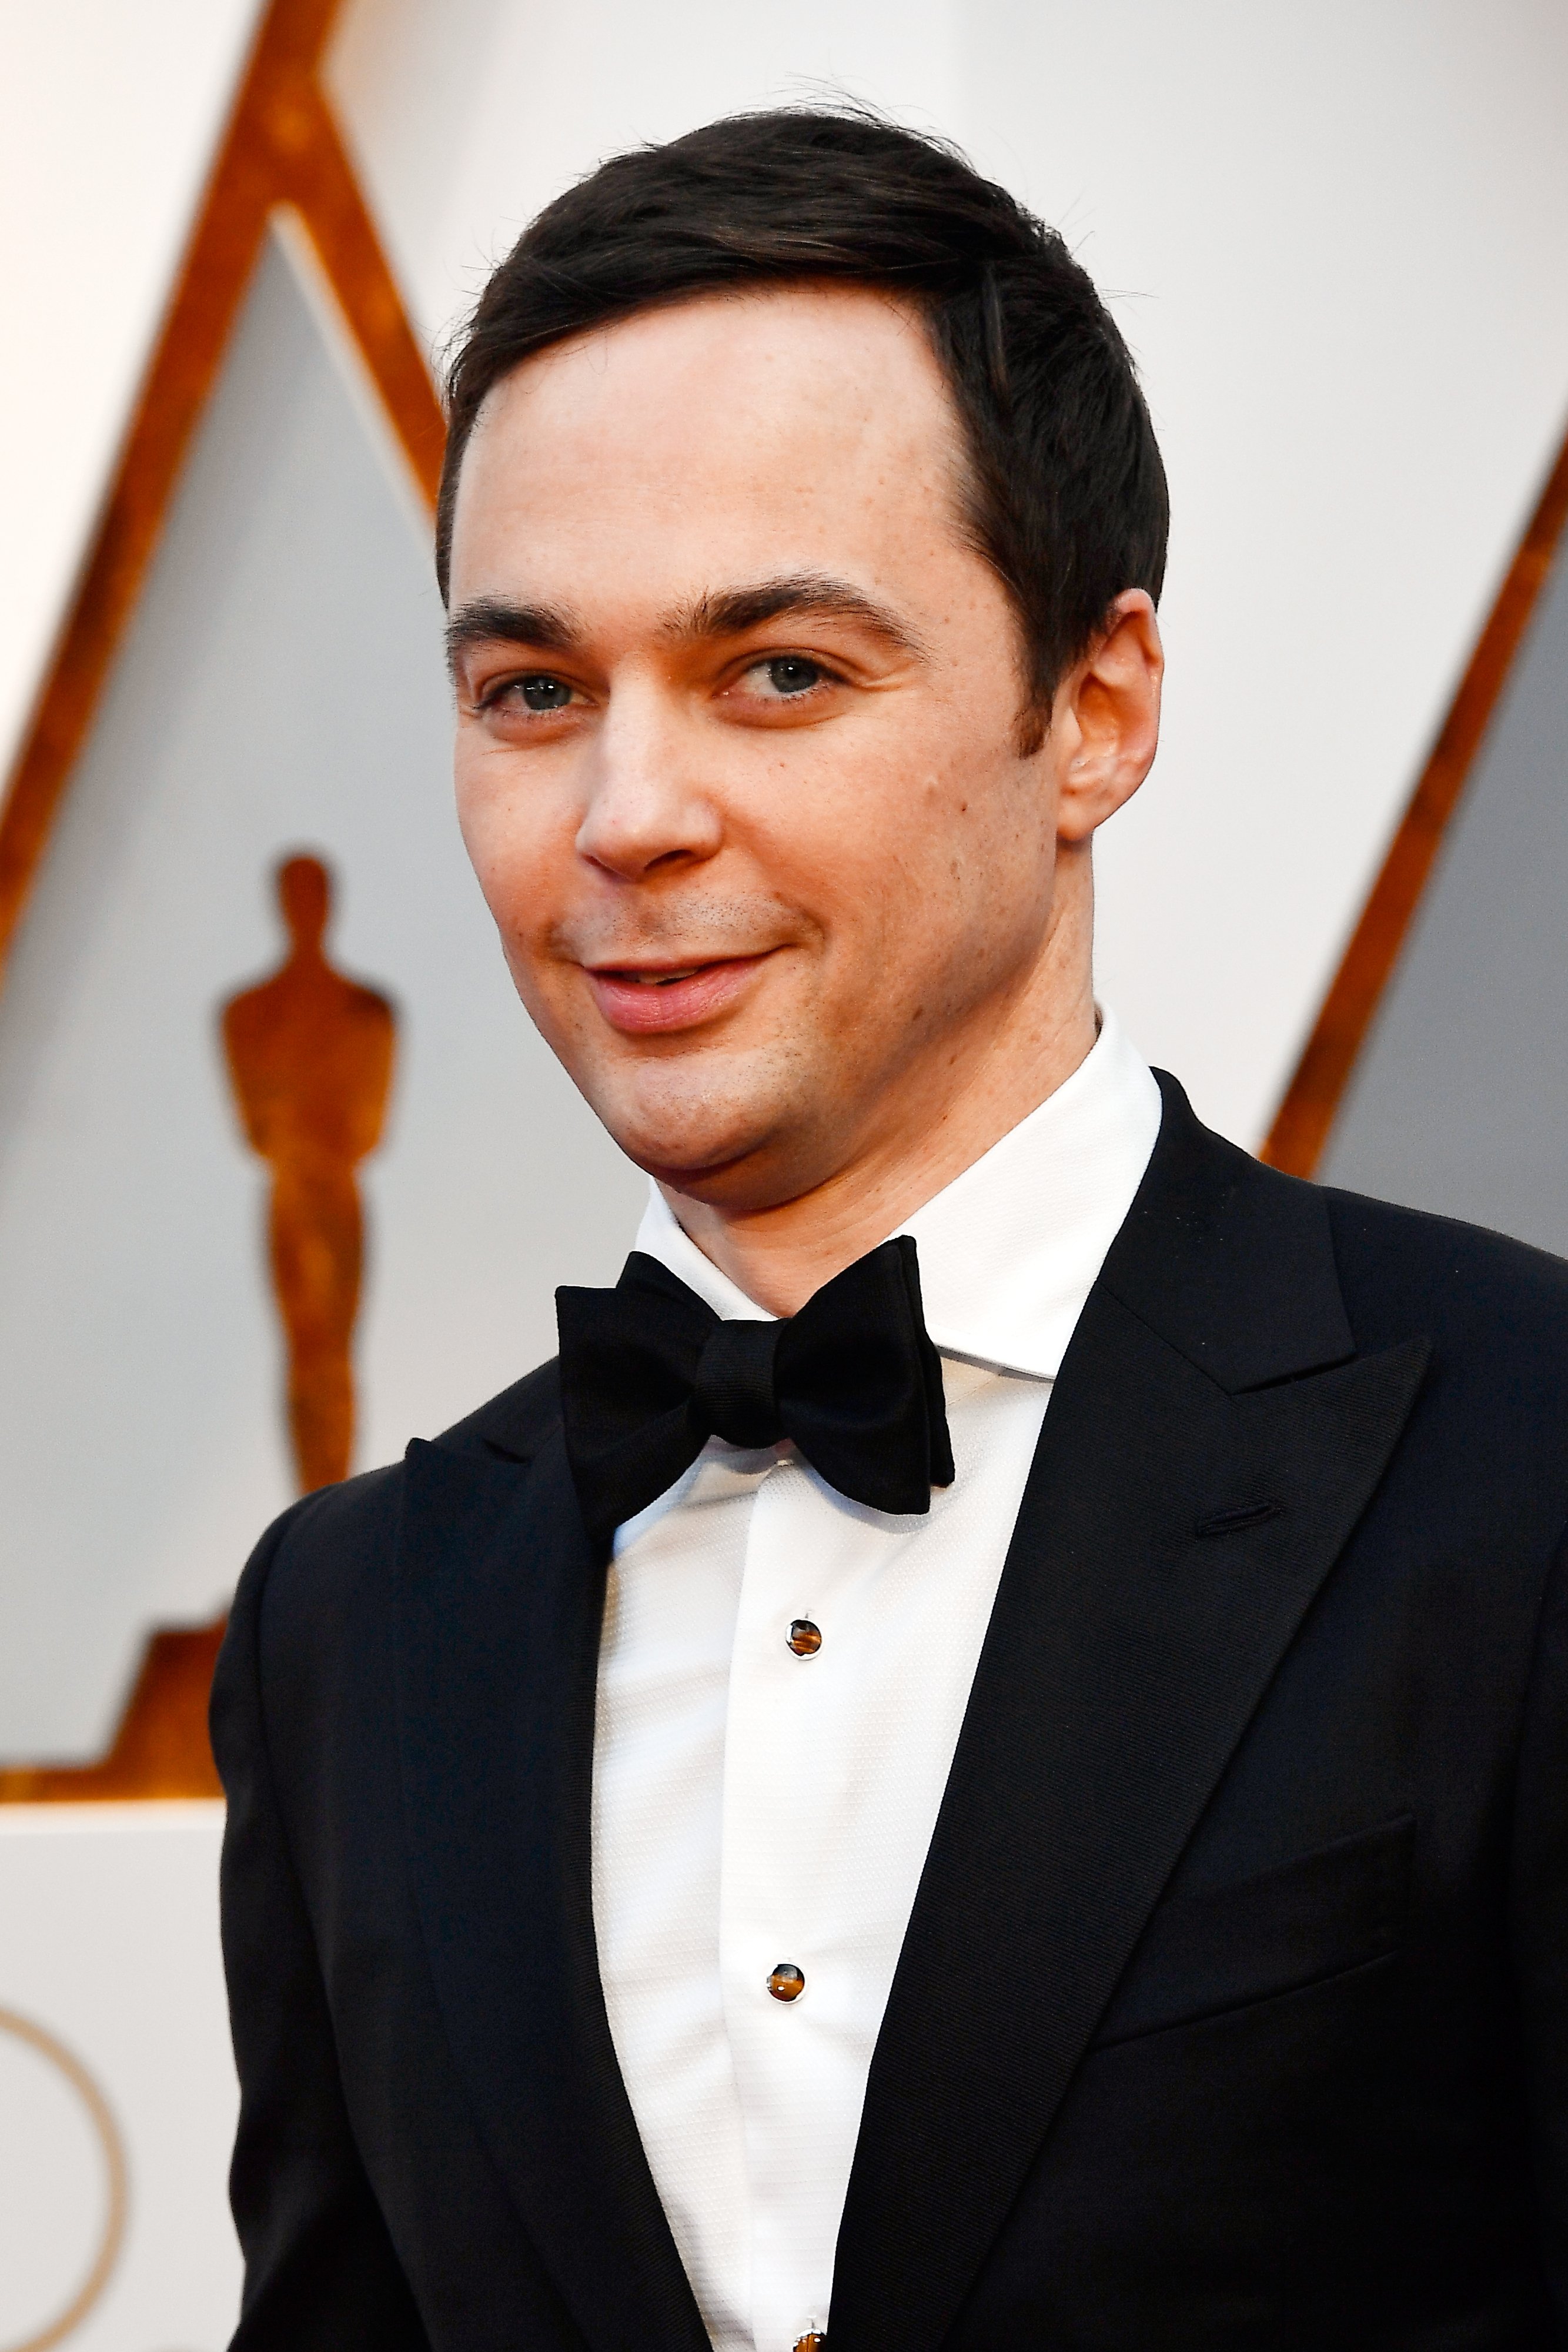 Jim Parsons attends the 89th Annual Academy Awards at Hollywood & Highland Center on February 26, 2017, in Hollywood, California. | Source: Getty Images.